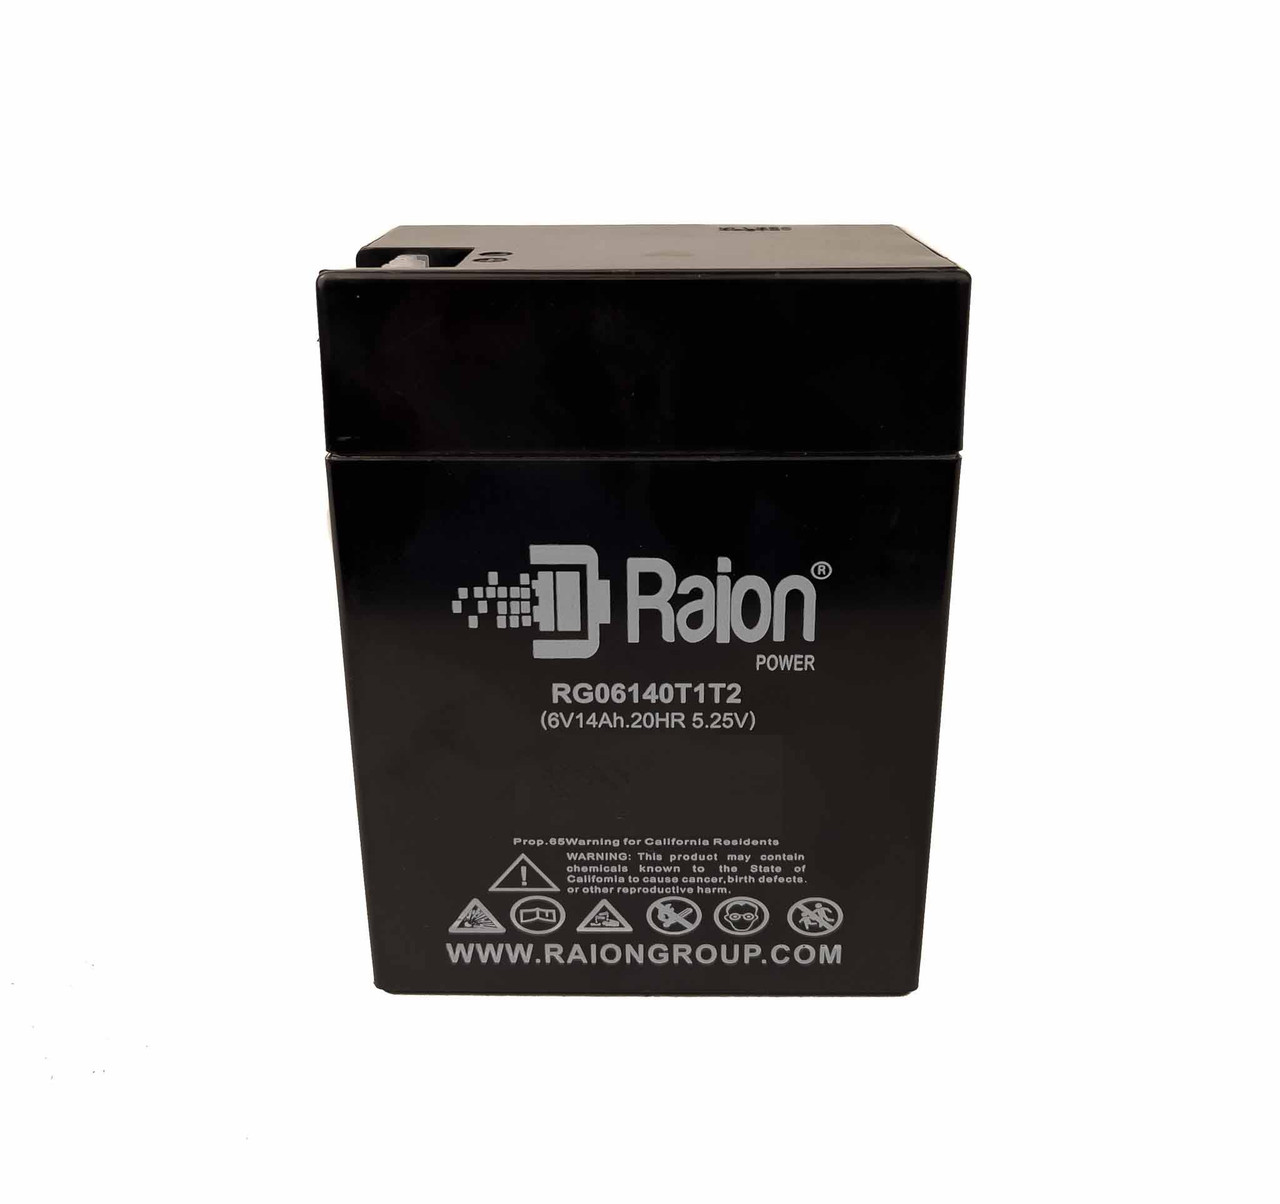 Raion Power RG06140T1T2 Replacement Battery for Parmak 90 POWERHOUSE Electric Fence Charger